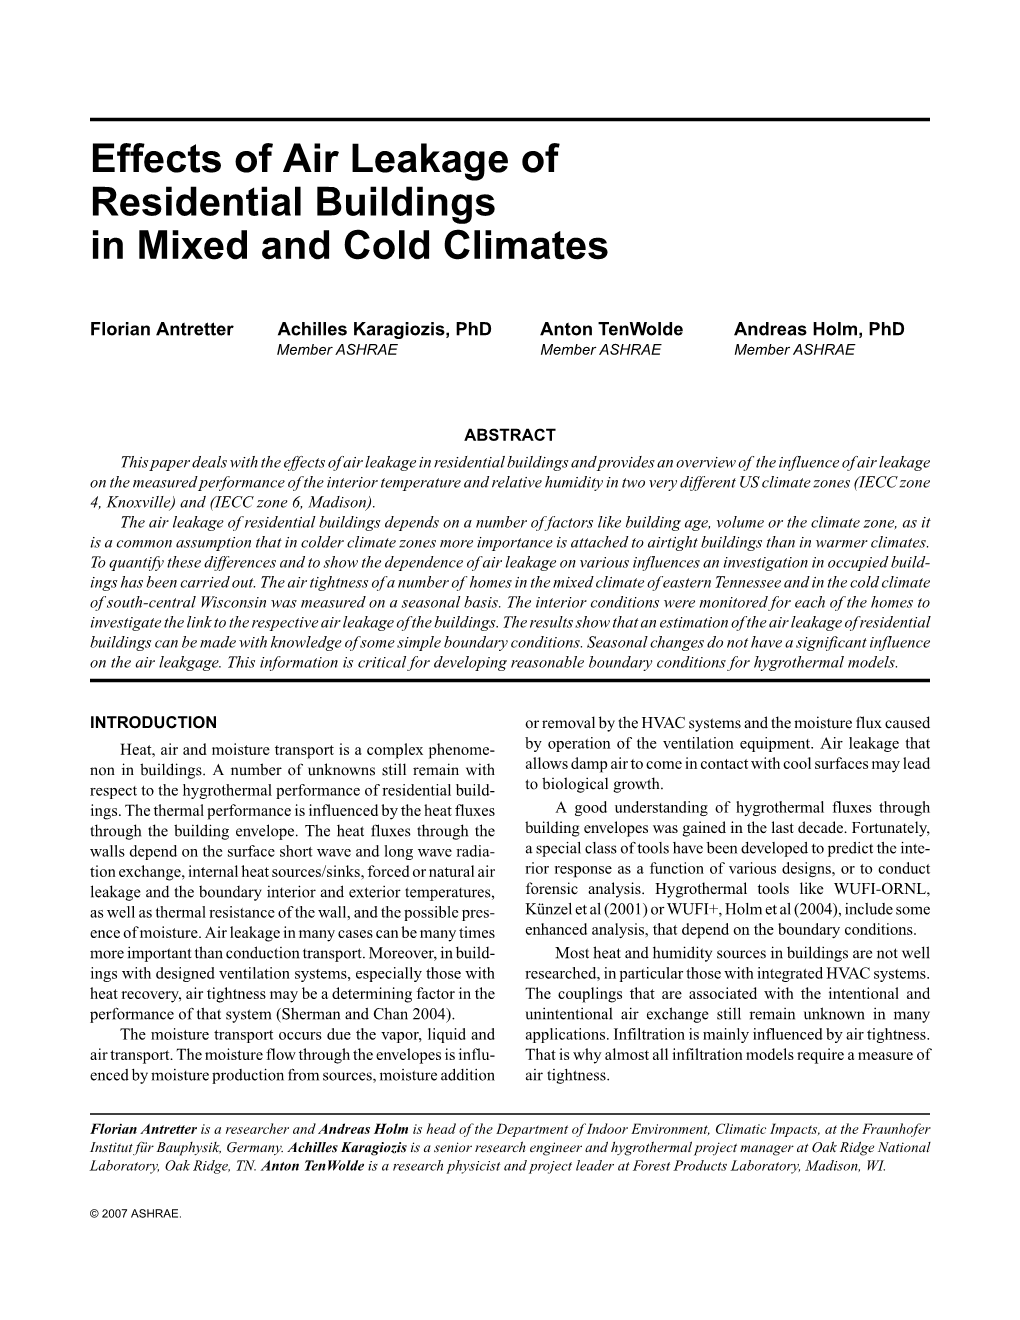 Effects of Air Leakage of Residential Buildings in Mixed and Cold Climates